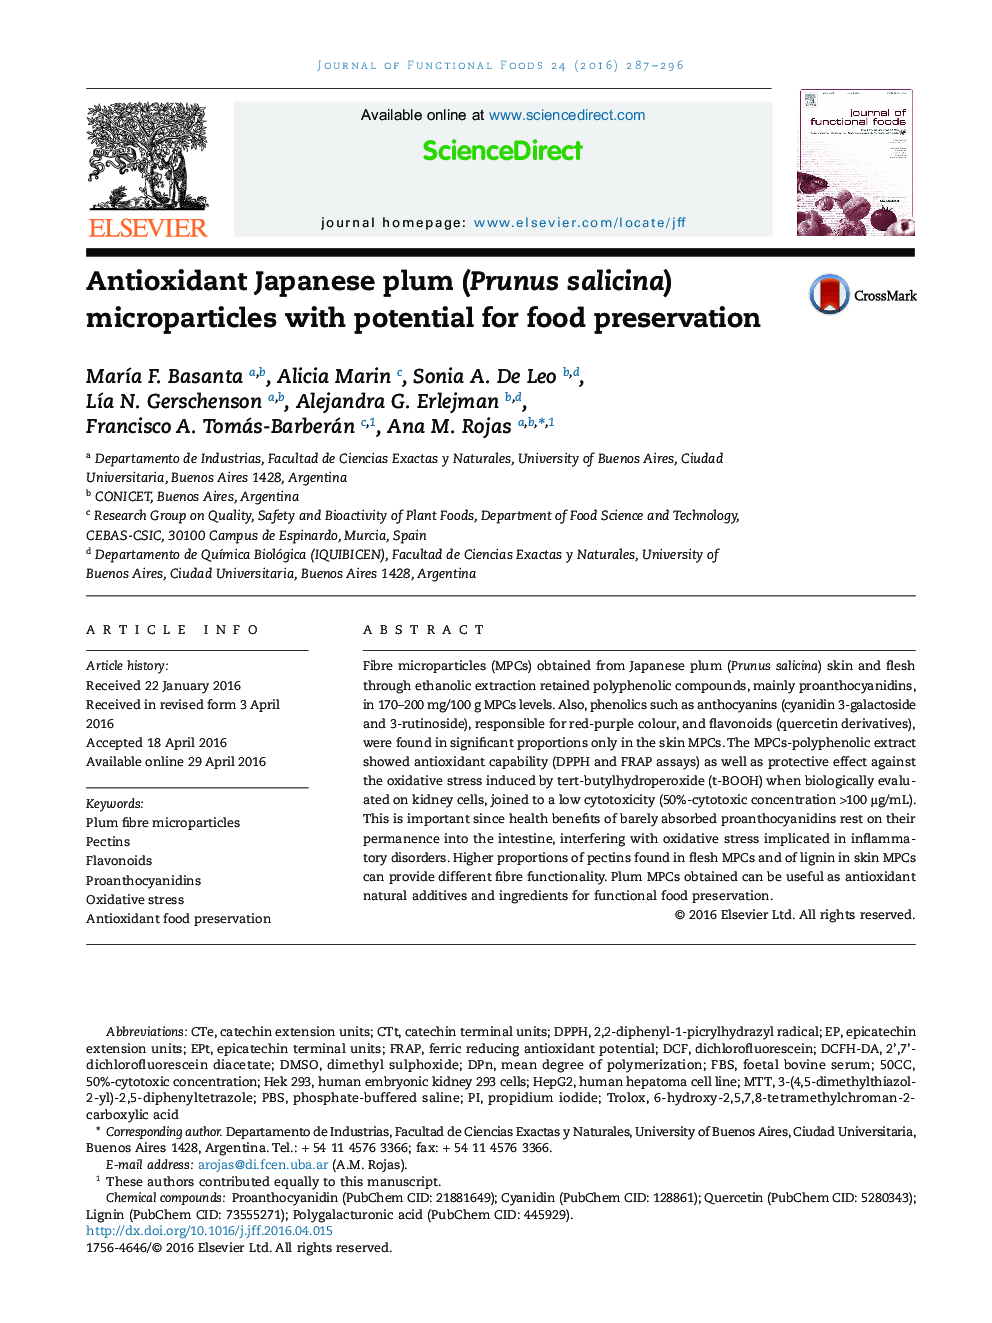 Antioxidant Japanese plum (Prunus salicina) microparticles with potential for food preservation